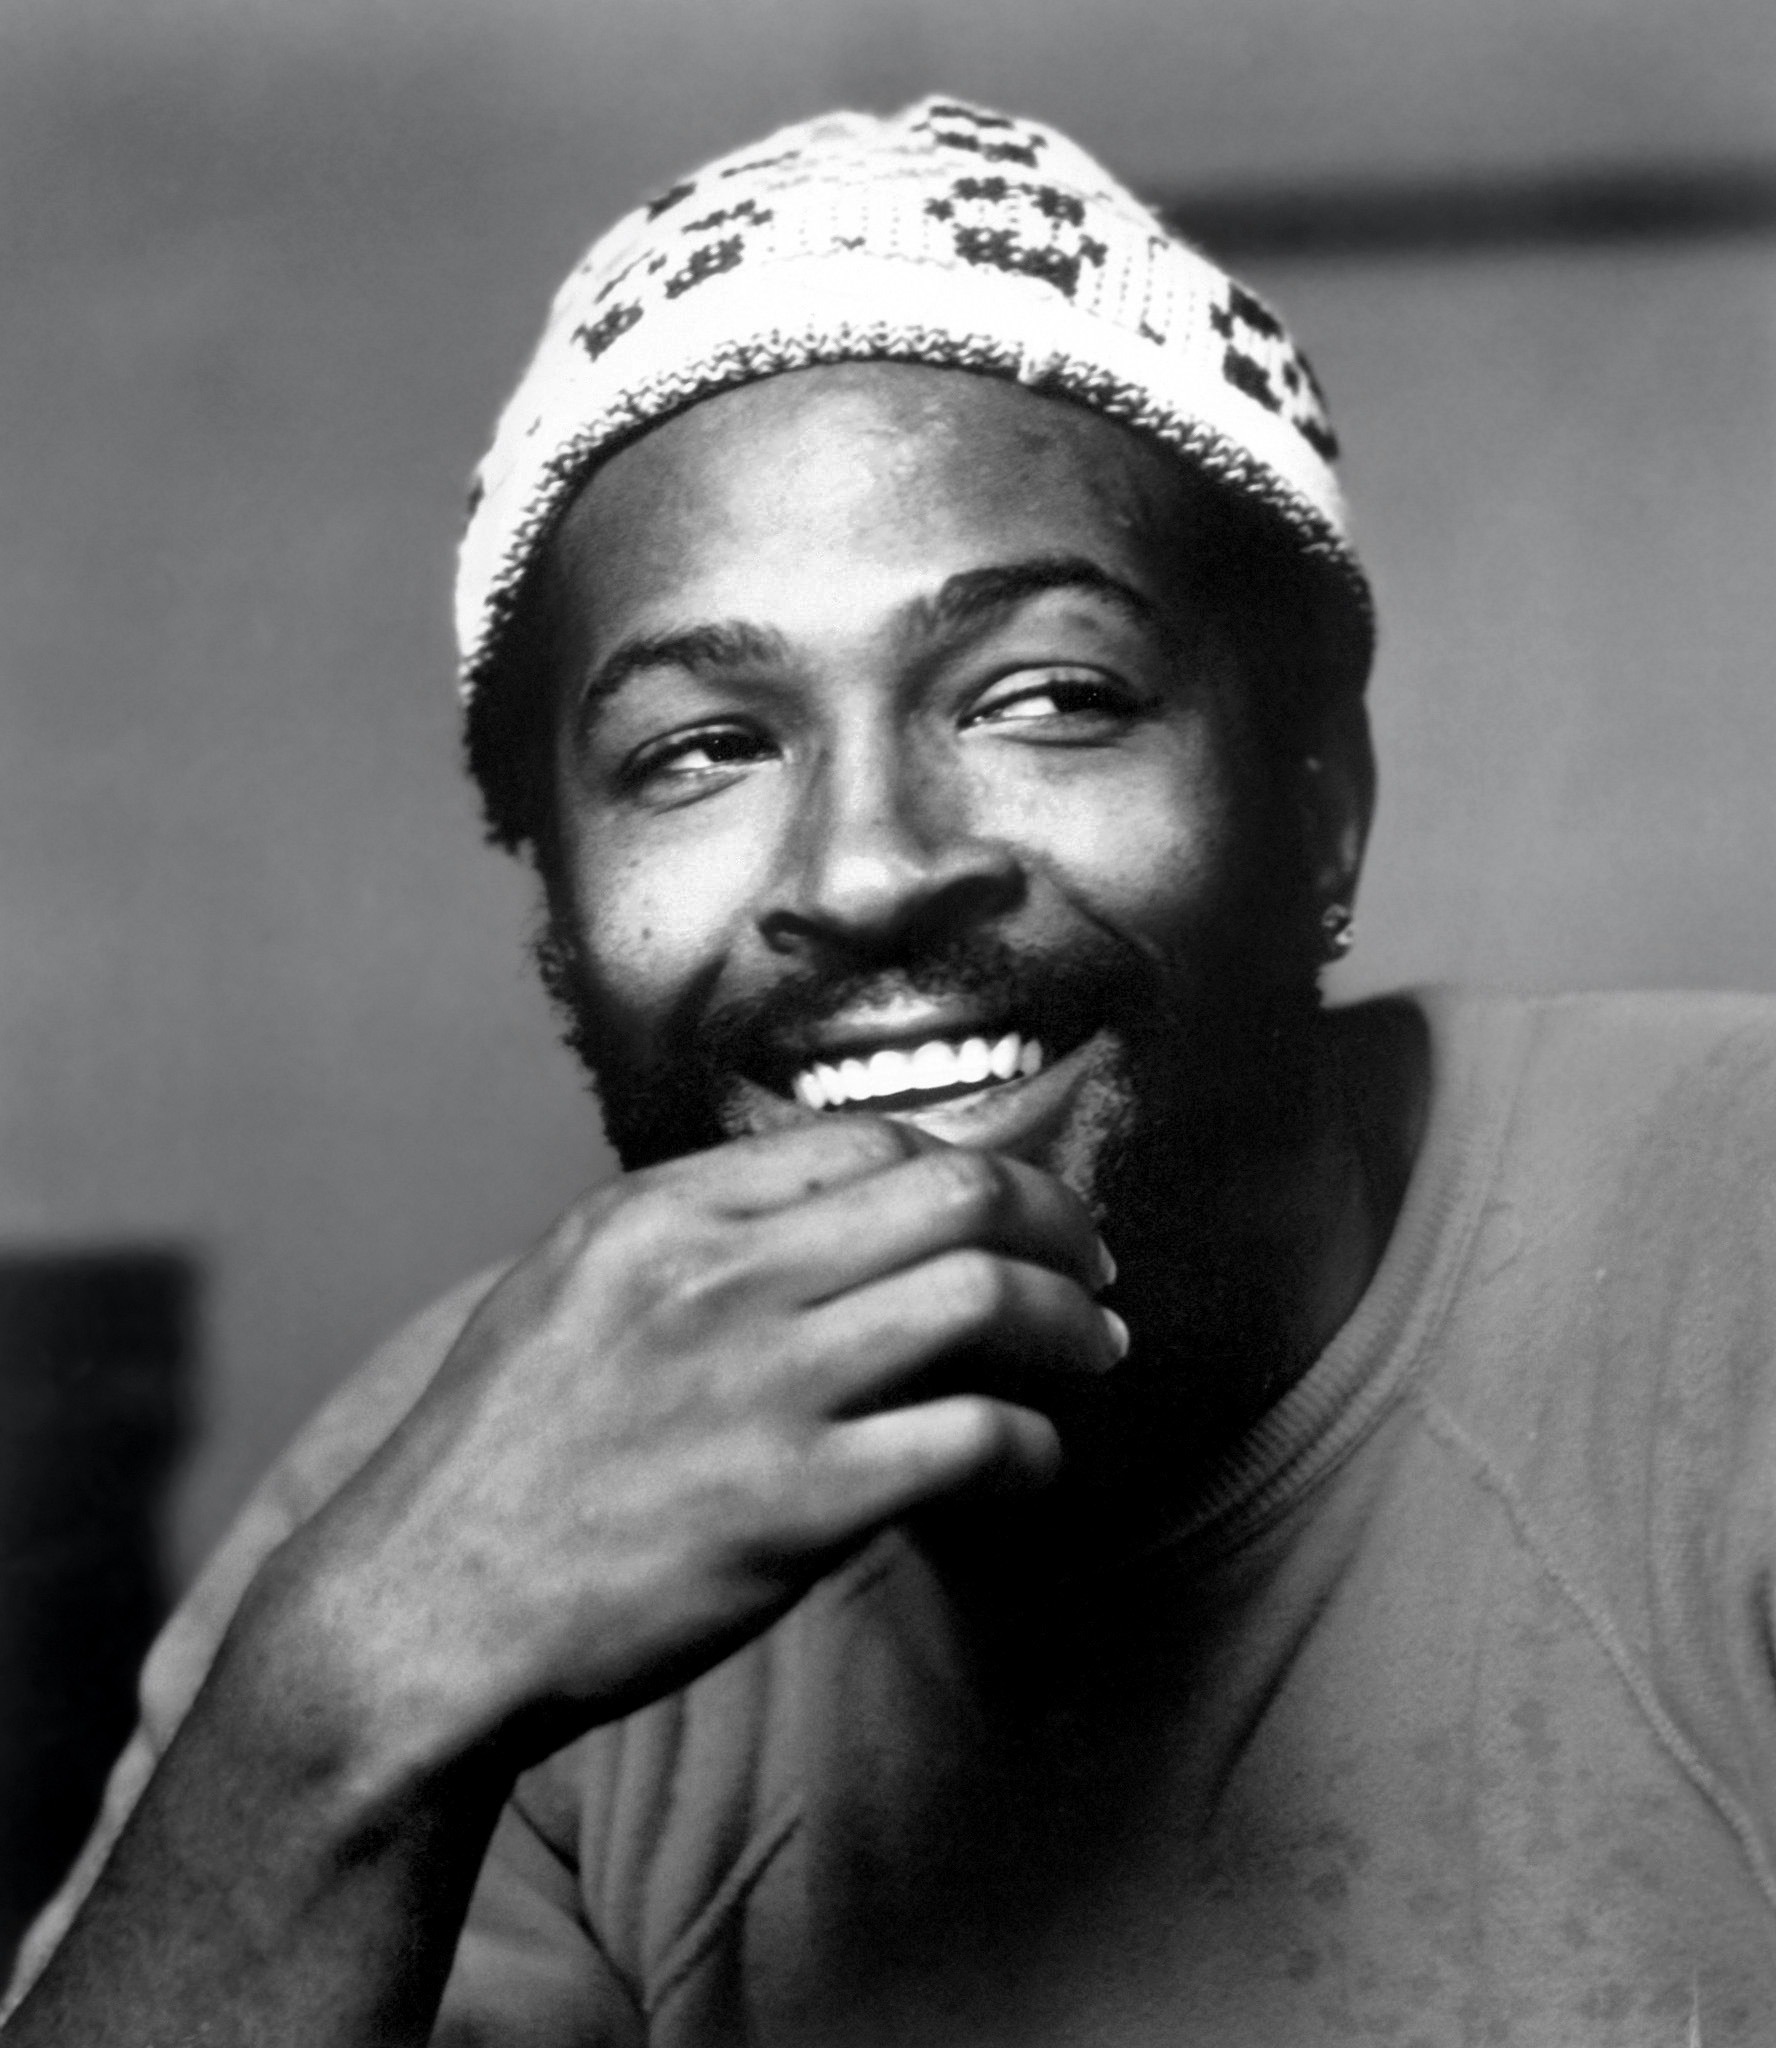 The Prince of Soul Marvin Gaye